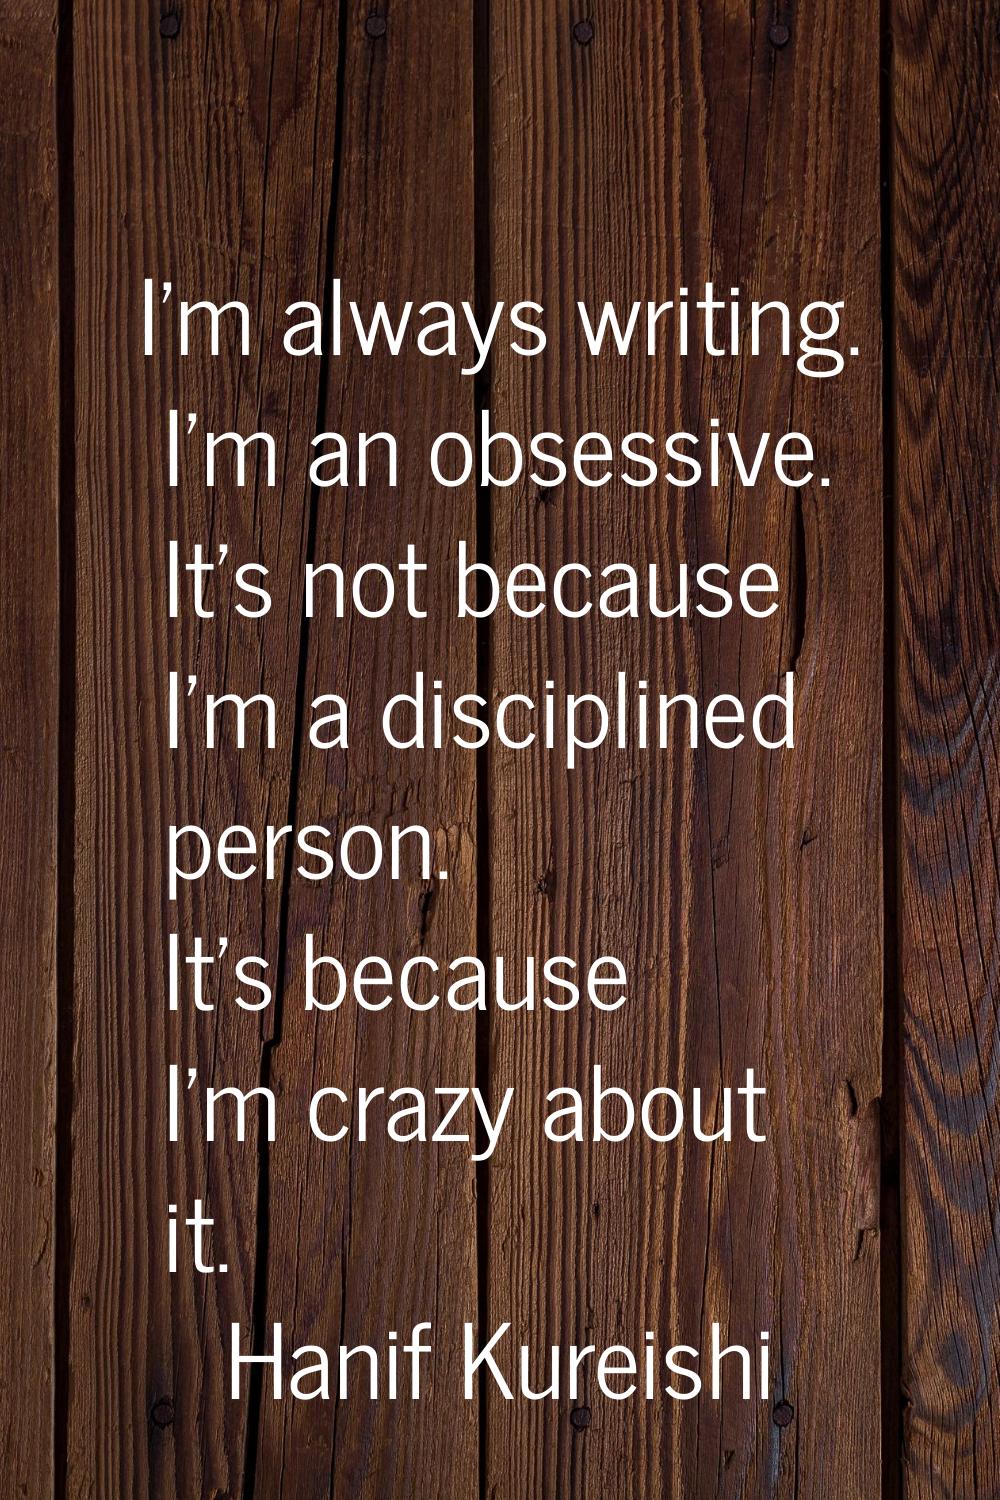 I'm always writing. I'm an obsessive. It's not because I'm a disciplined person. It's because I'm c